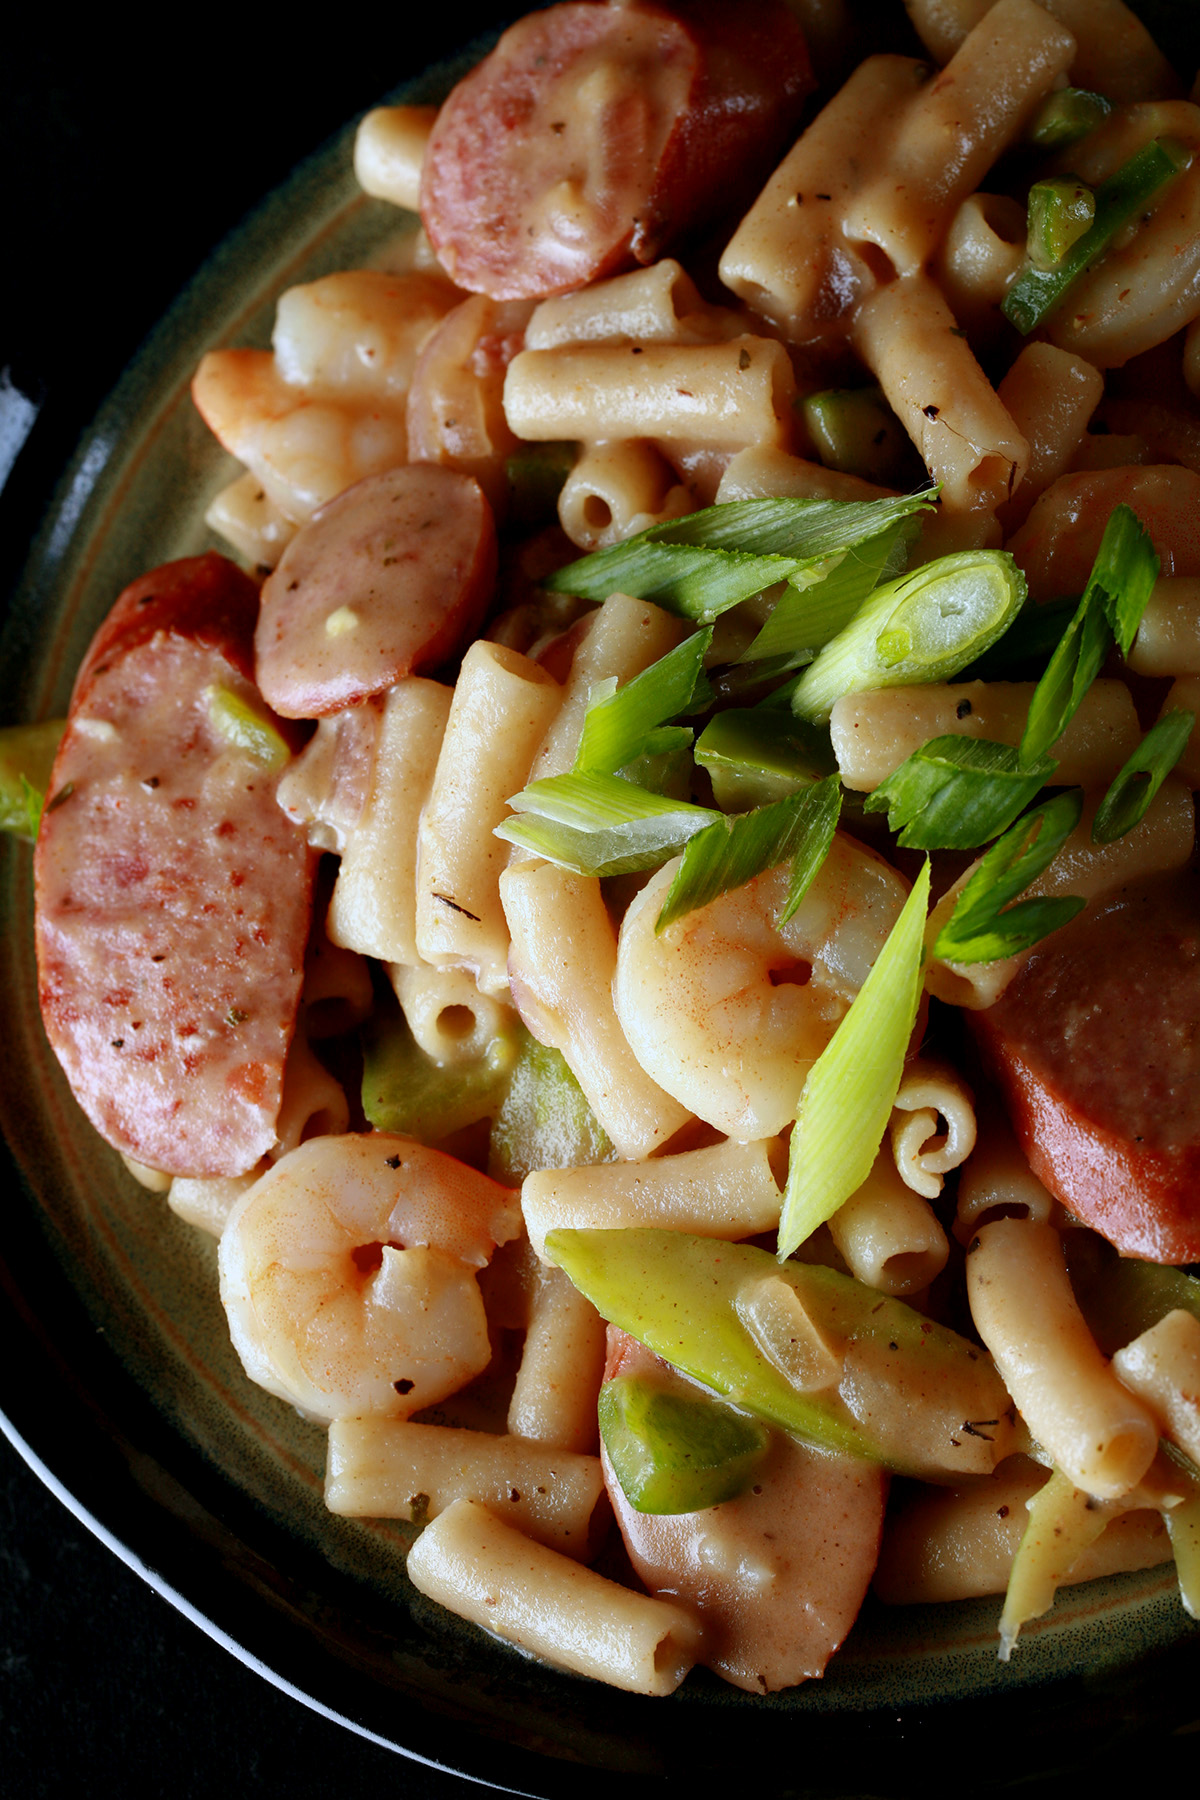 A plate of gluten-Free Creamy Creole Pasta.  Shrimp, chicken, sausage, and celery are visible.